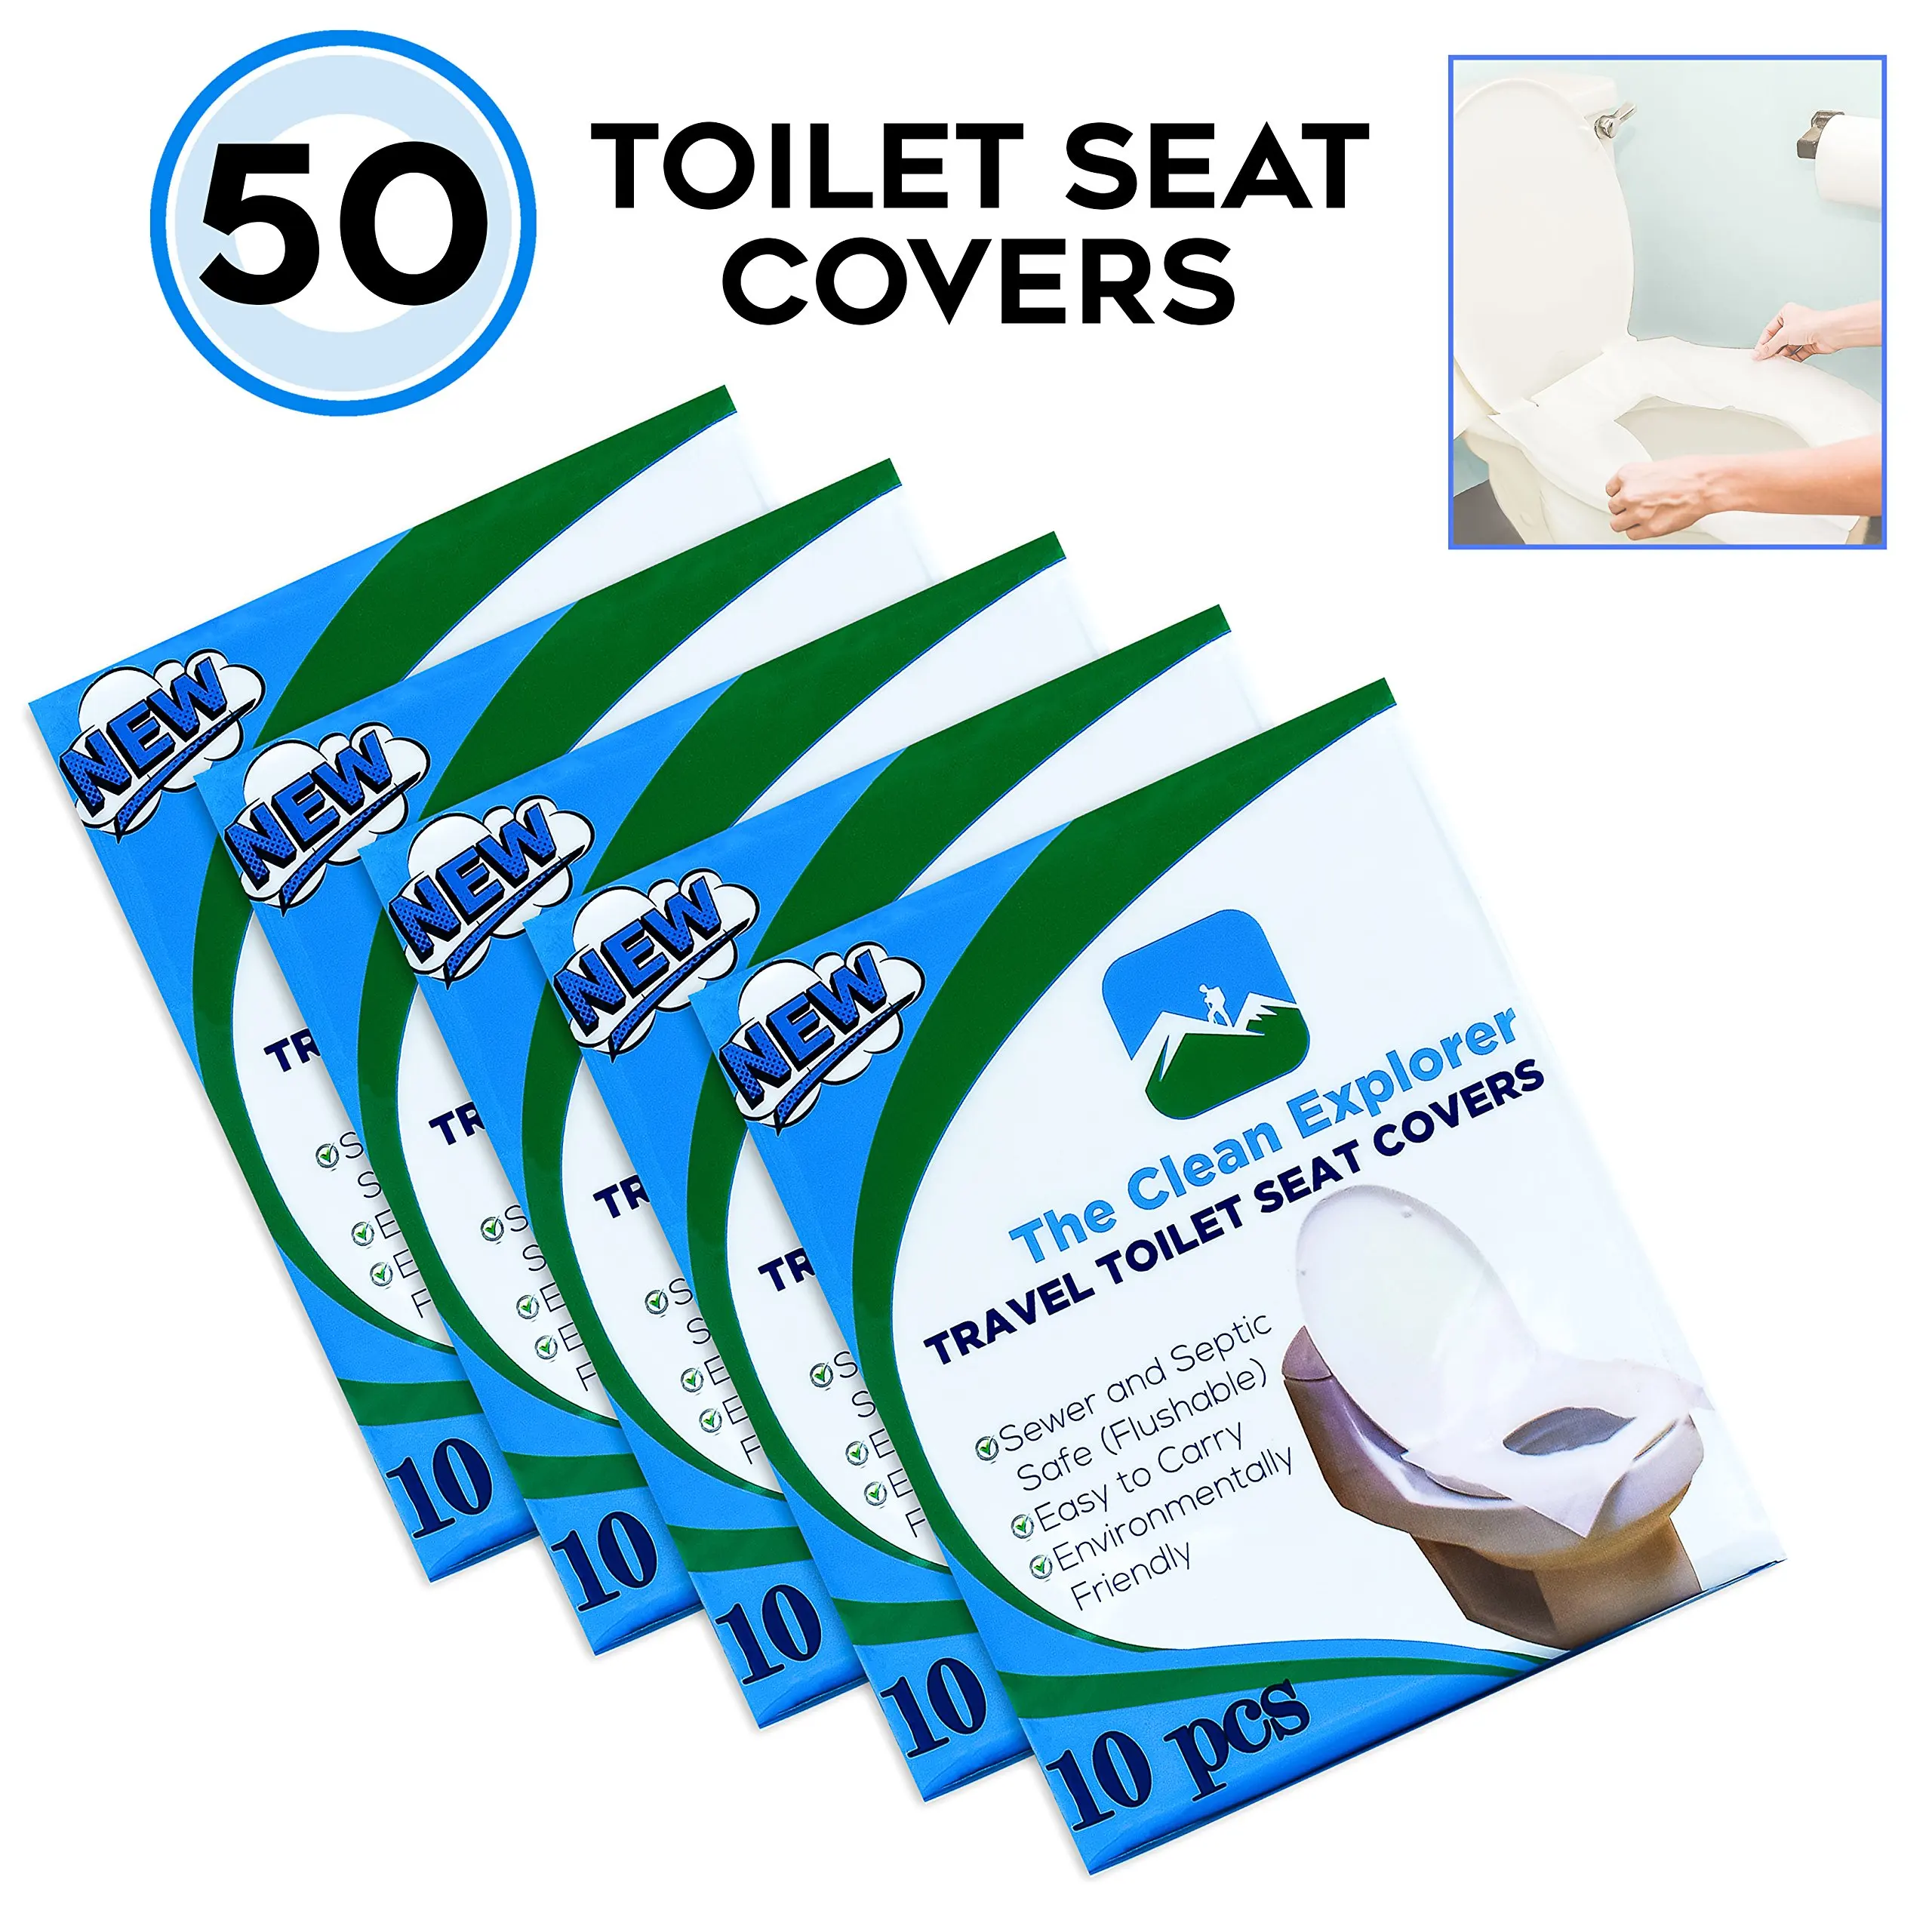 Buy Disposable Toilet Seat Covers, Travel, Office, Potty Training. 50